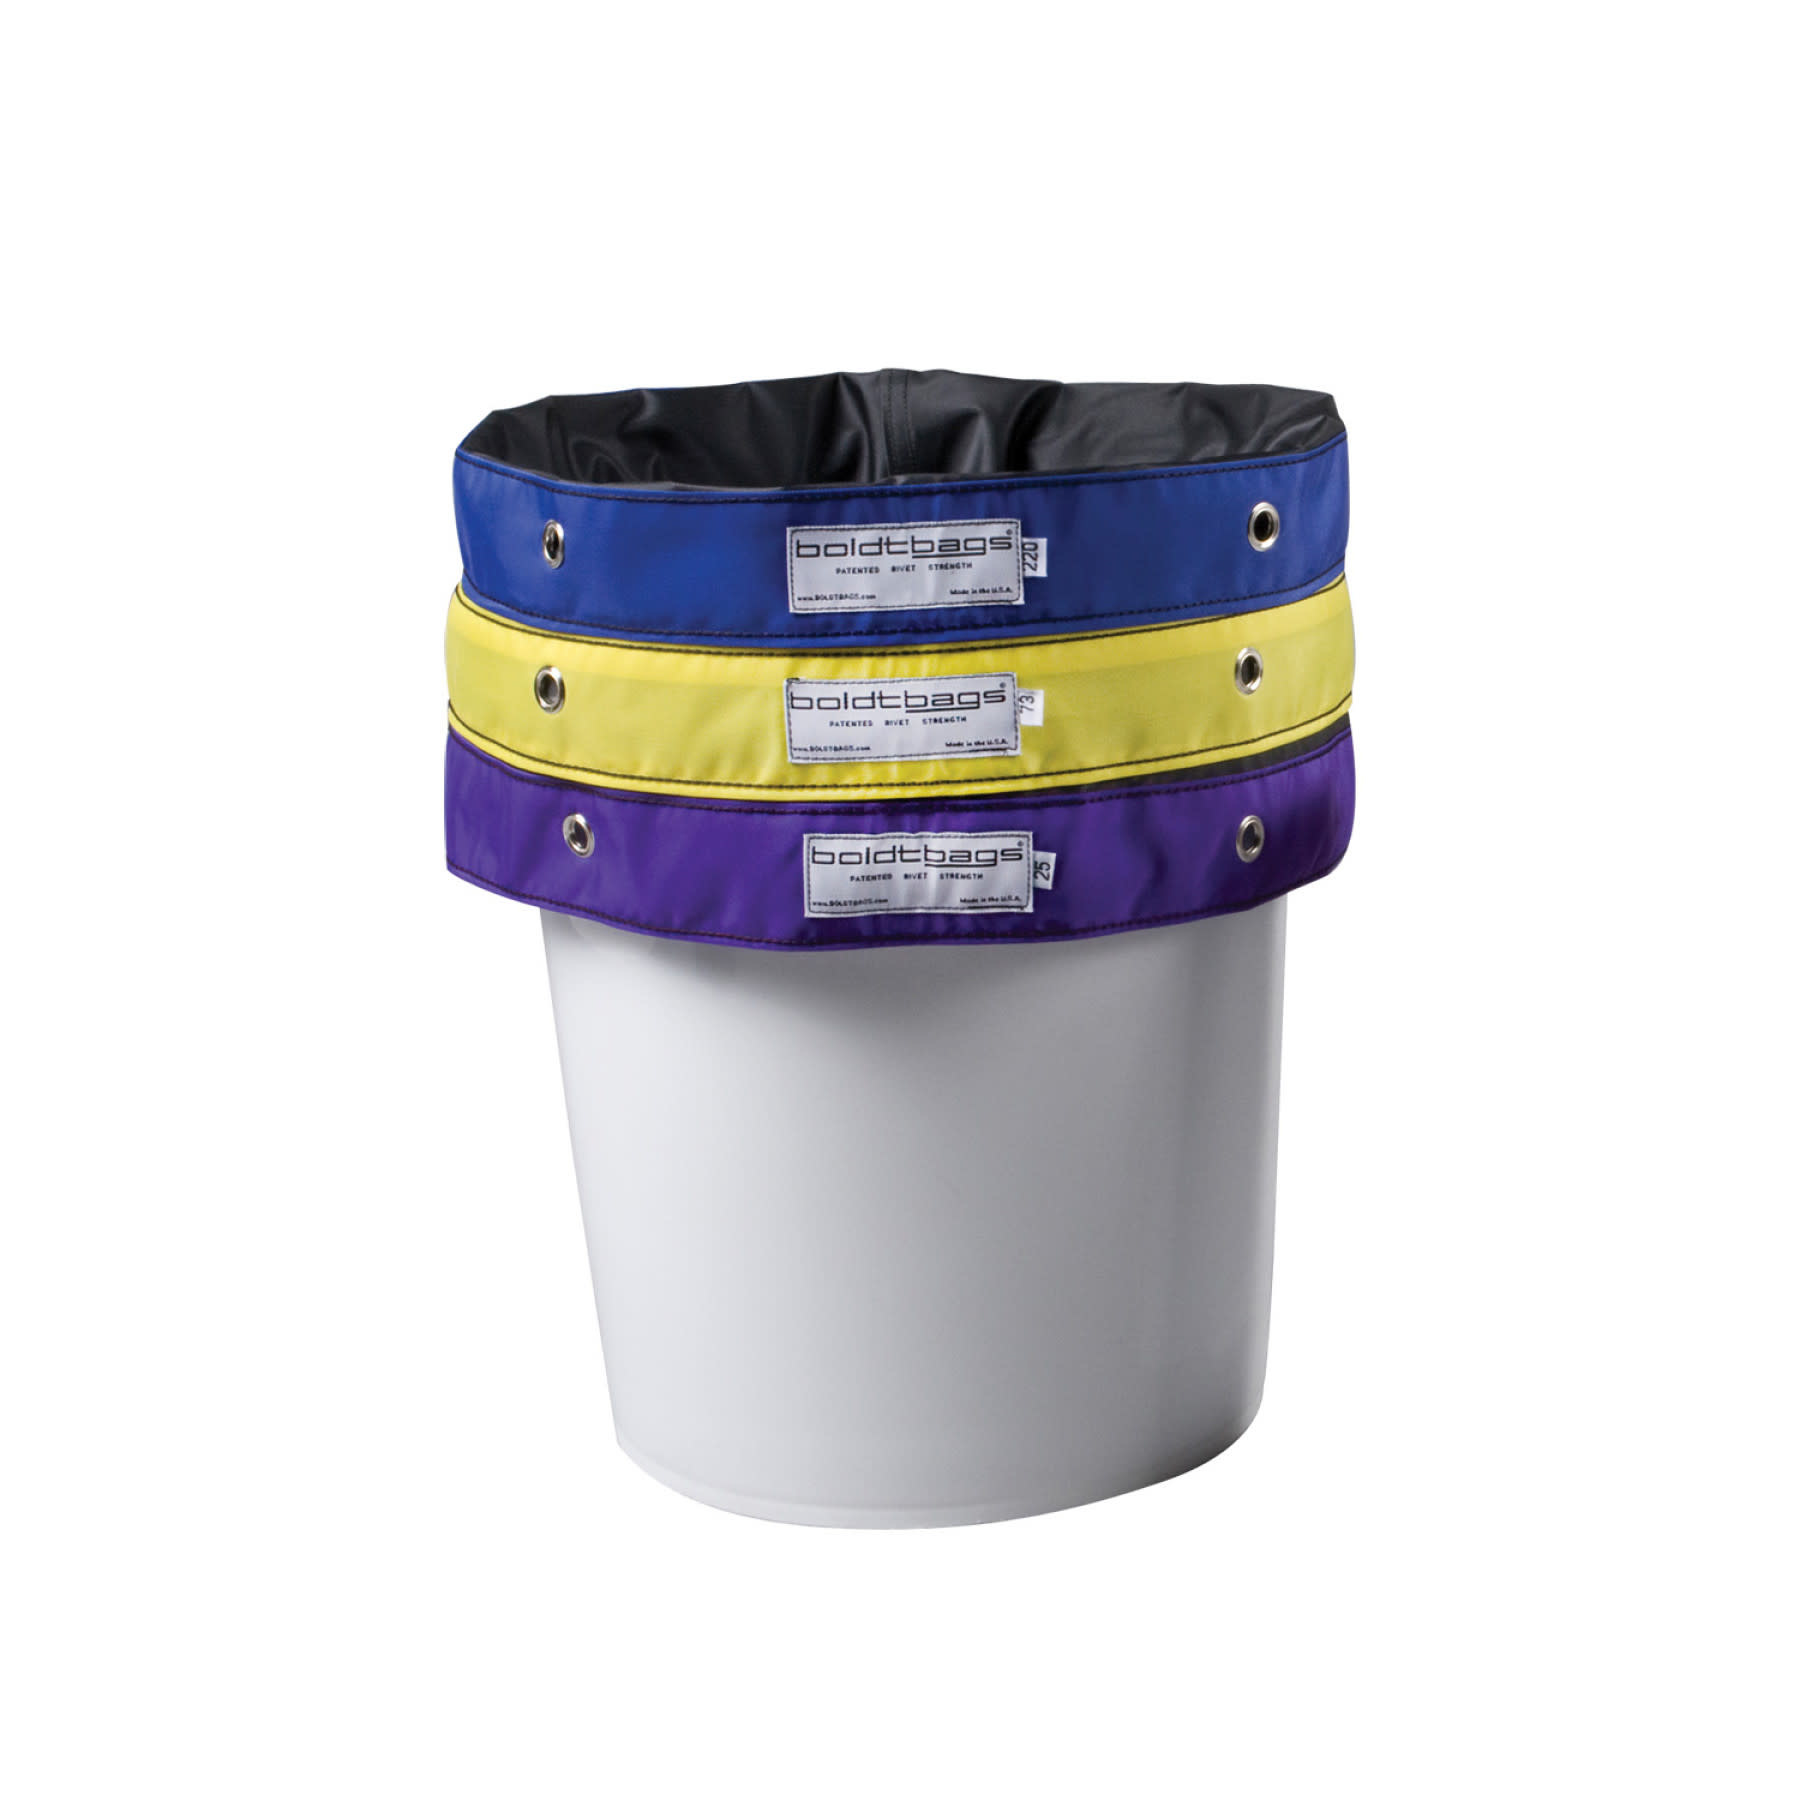 Boldtbags 5 Gallon Boldtbags (Pack of 3)